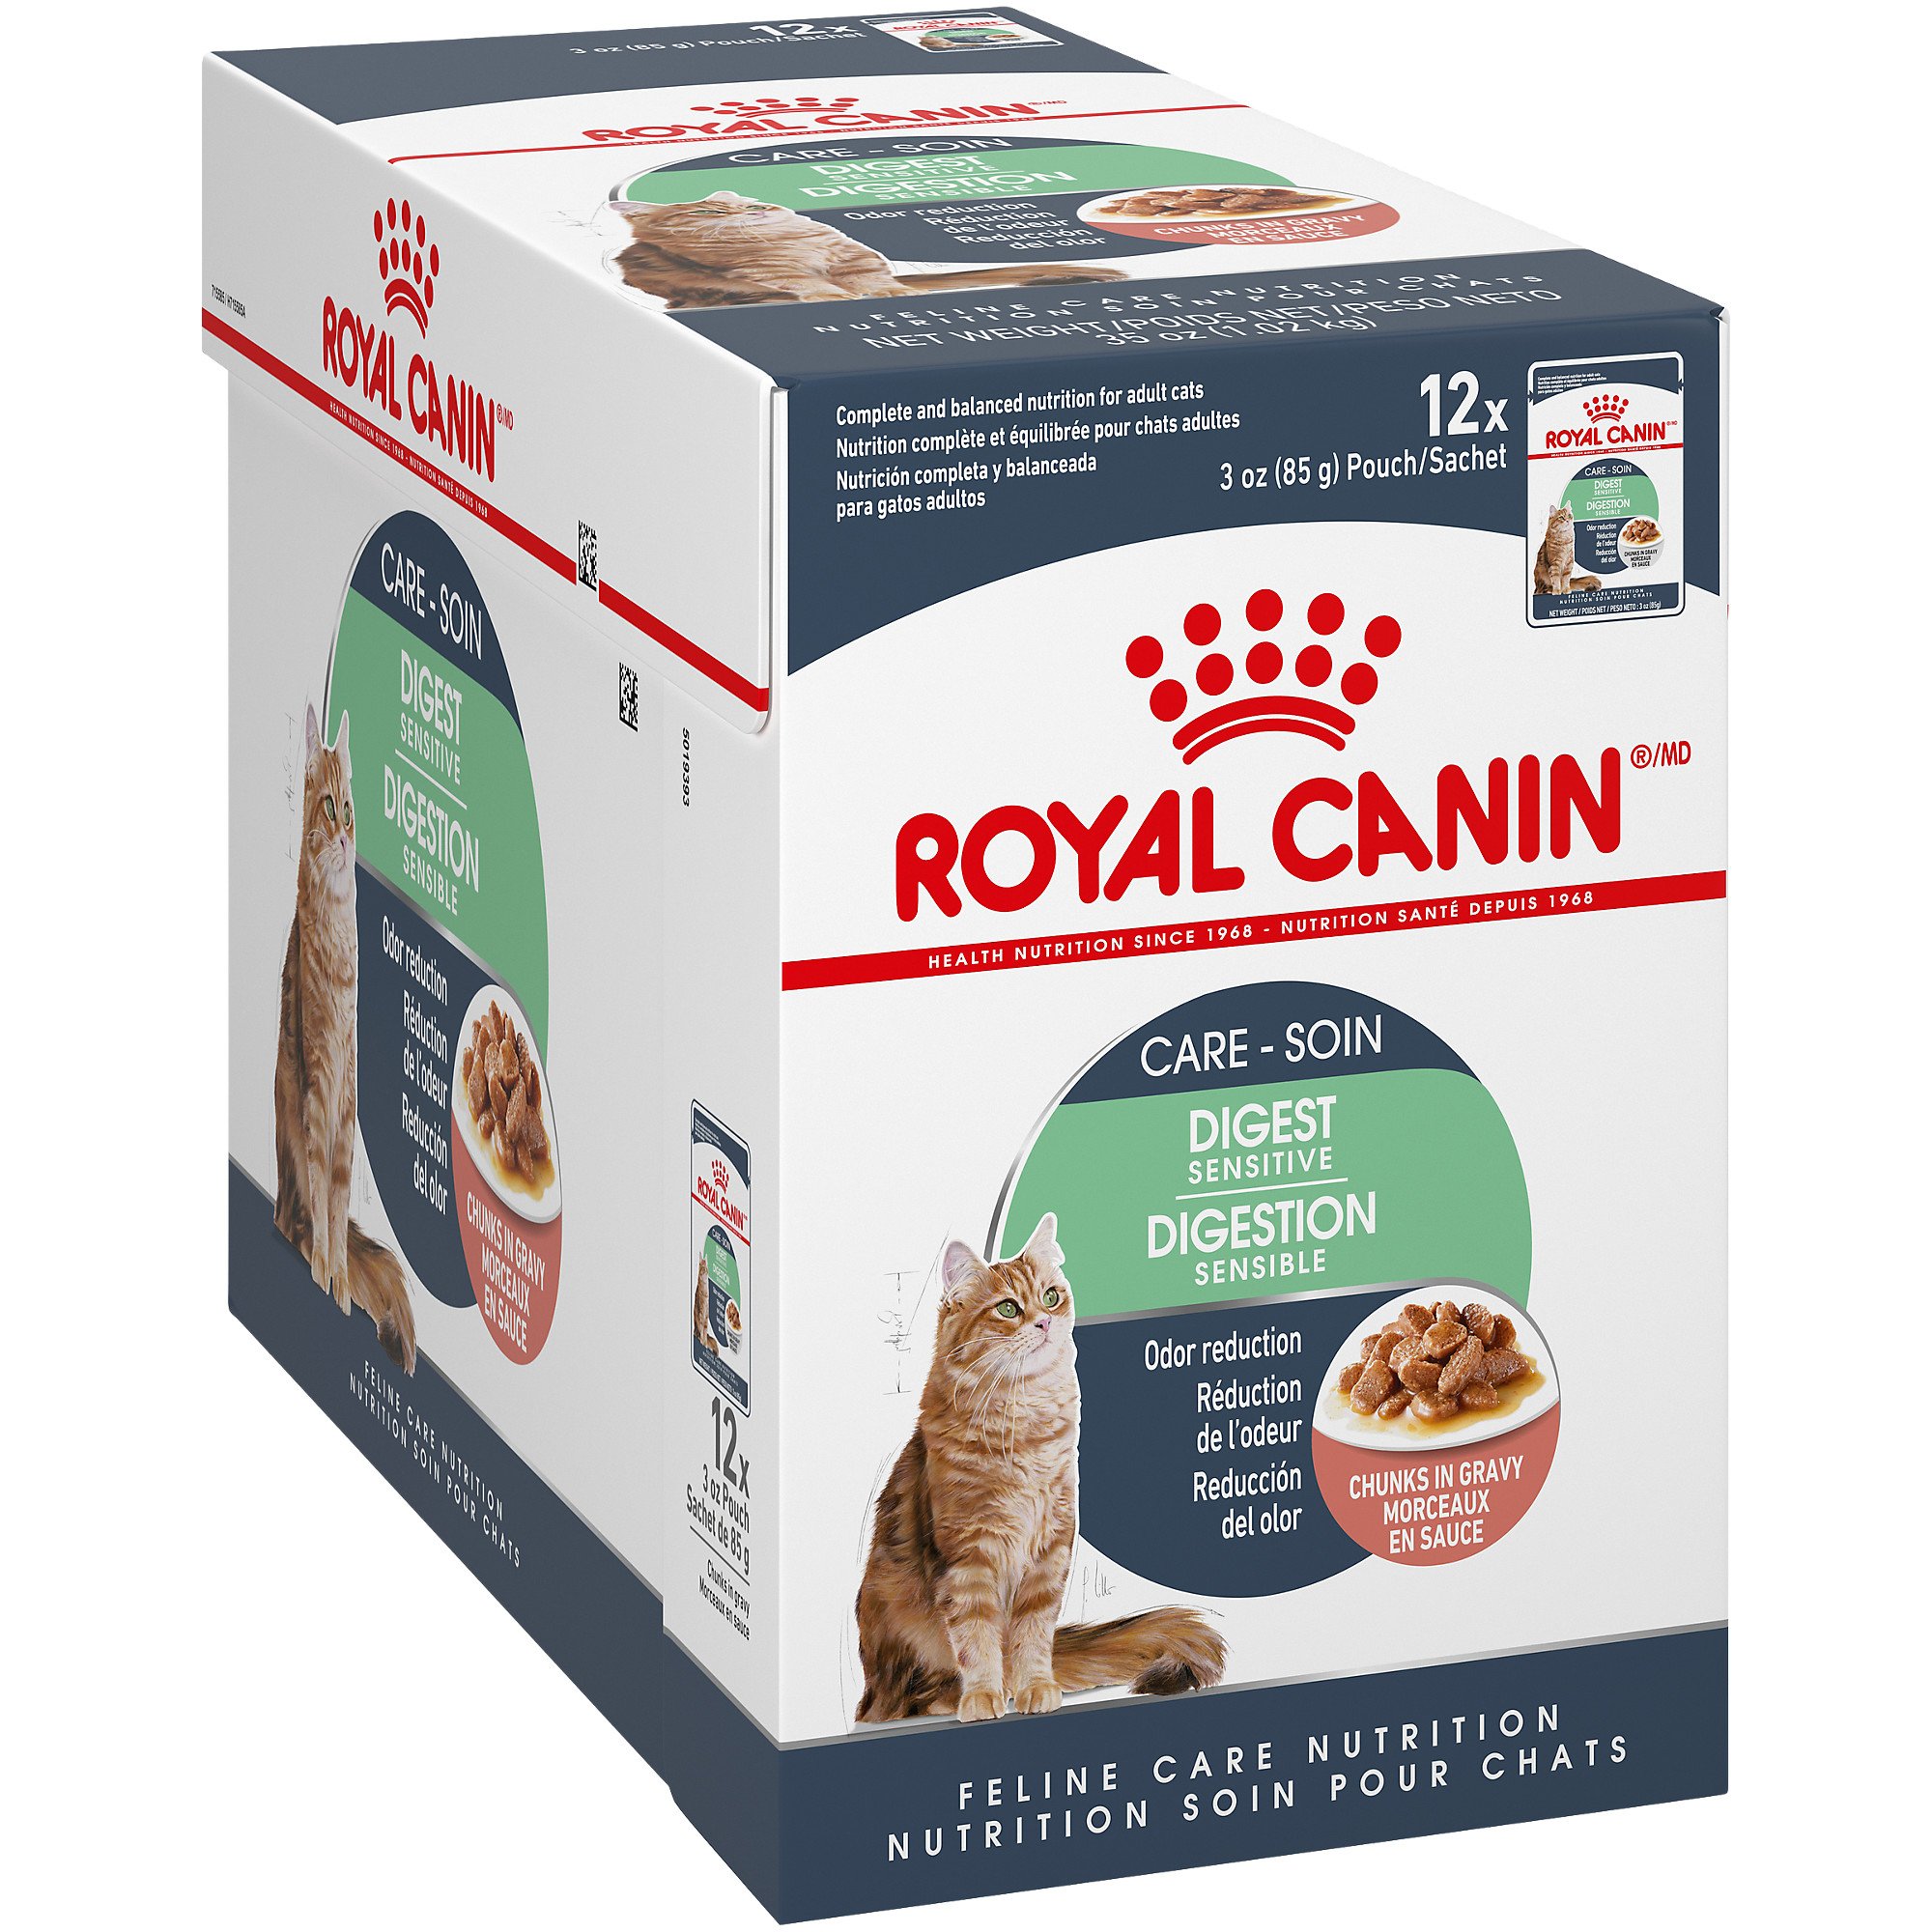 Royal Canin Digest Sensitive Wet Food Review